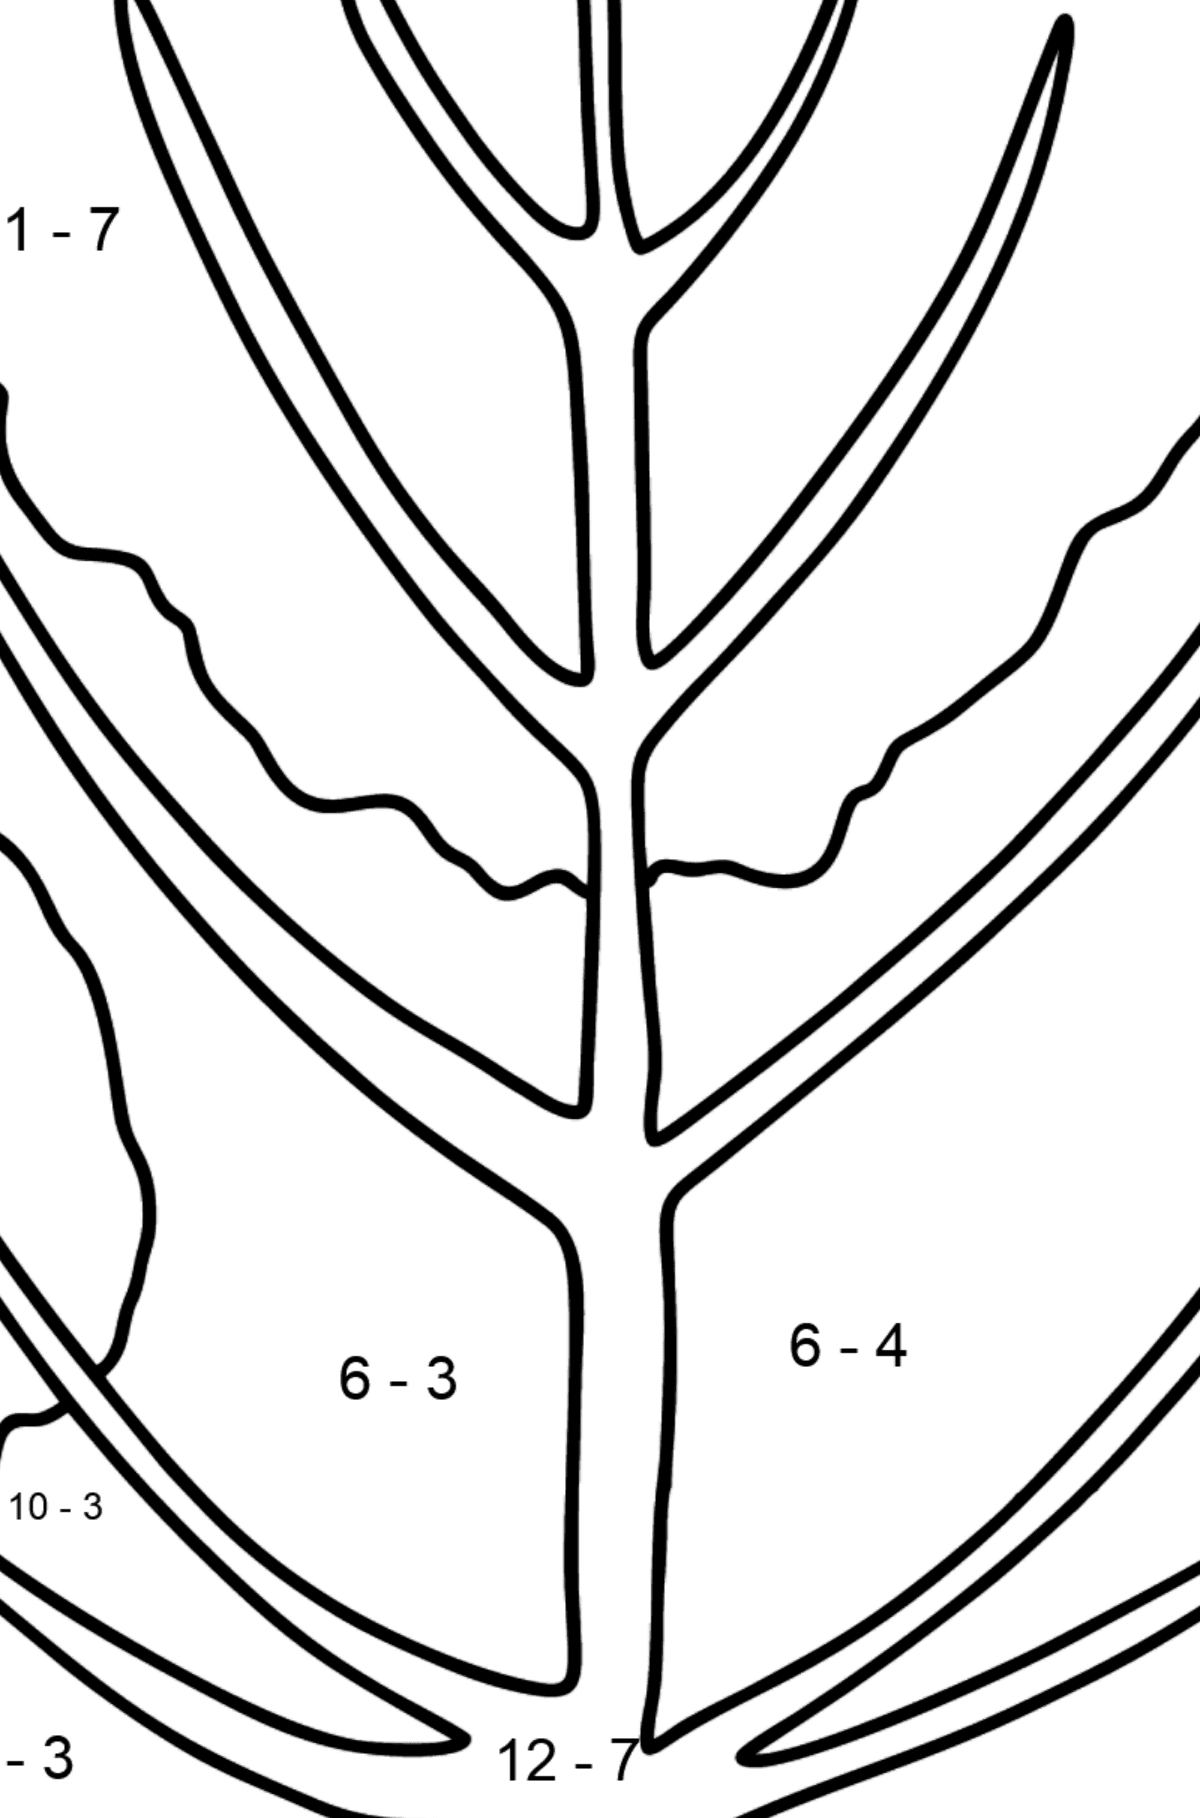 Aspen Leaf coloring page - Math Coloring - Subtraction for Kids